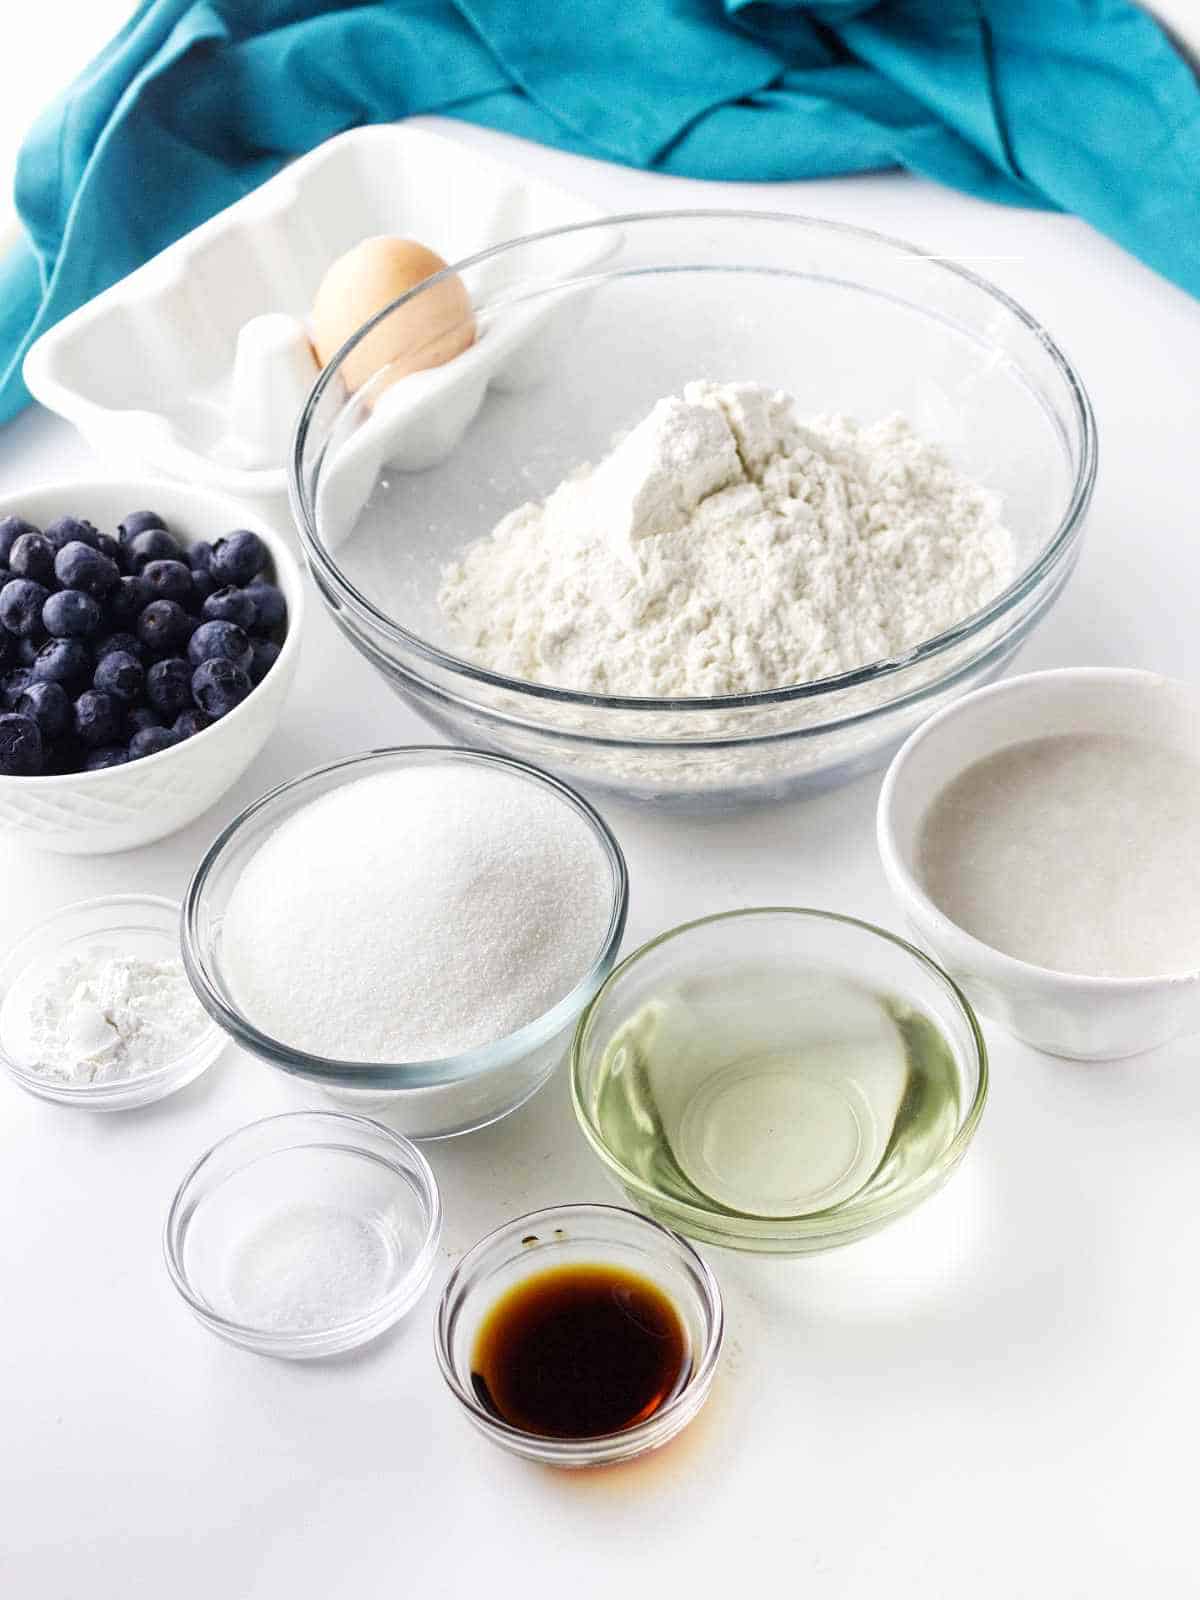 Ingredients for Jumbo Blueberry Muffins.